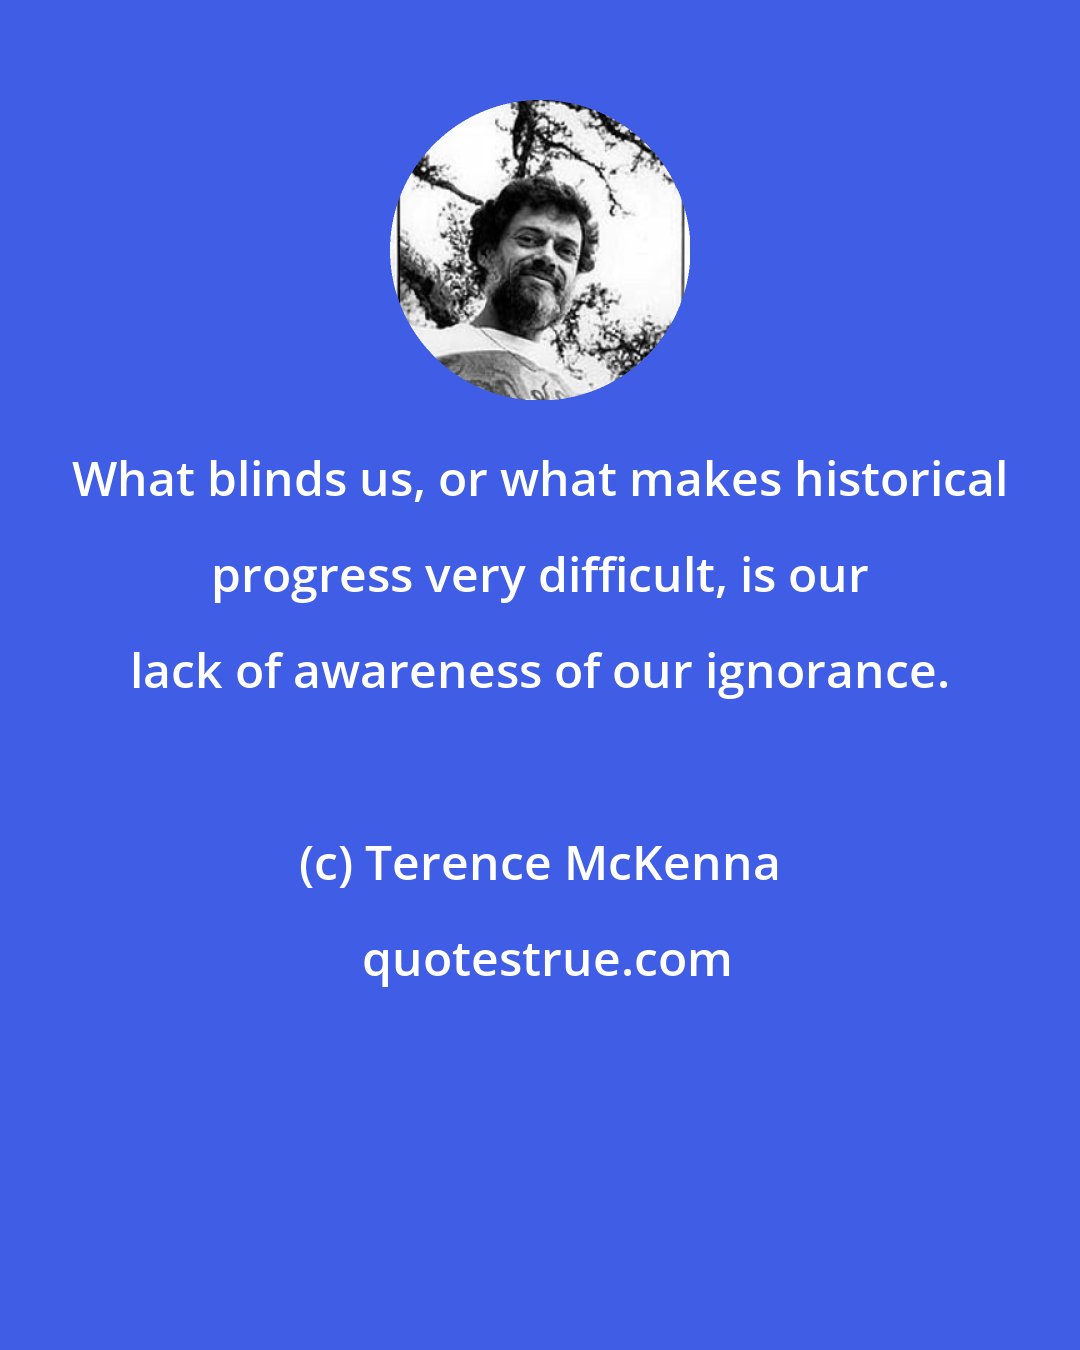 Terence McKenna: What blinds us, or what makes historical progress very difficult, is our lack of awareness of our ignorance.